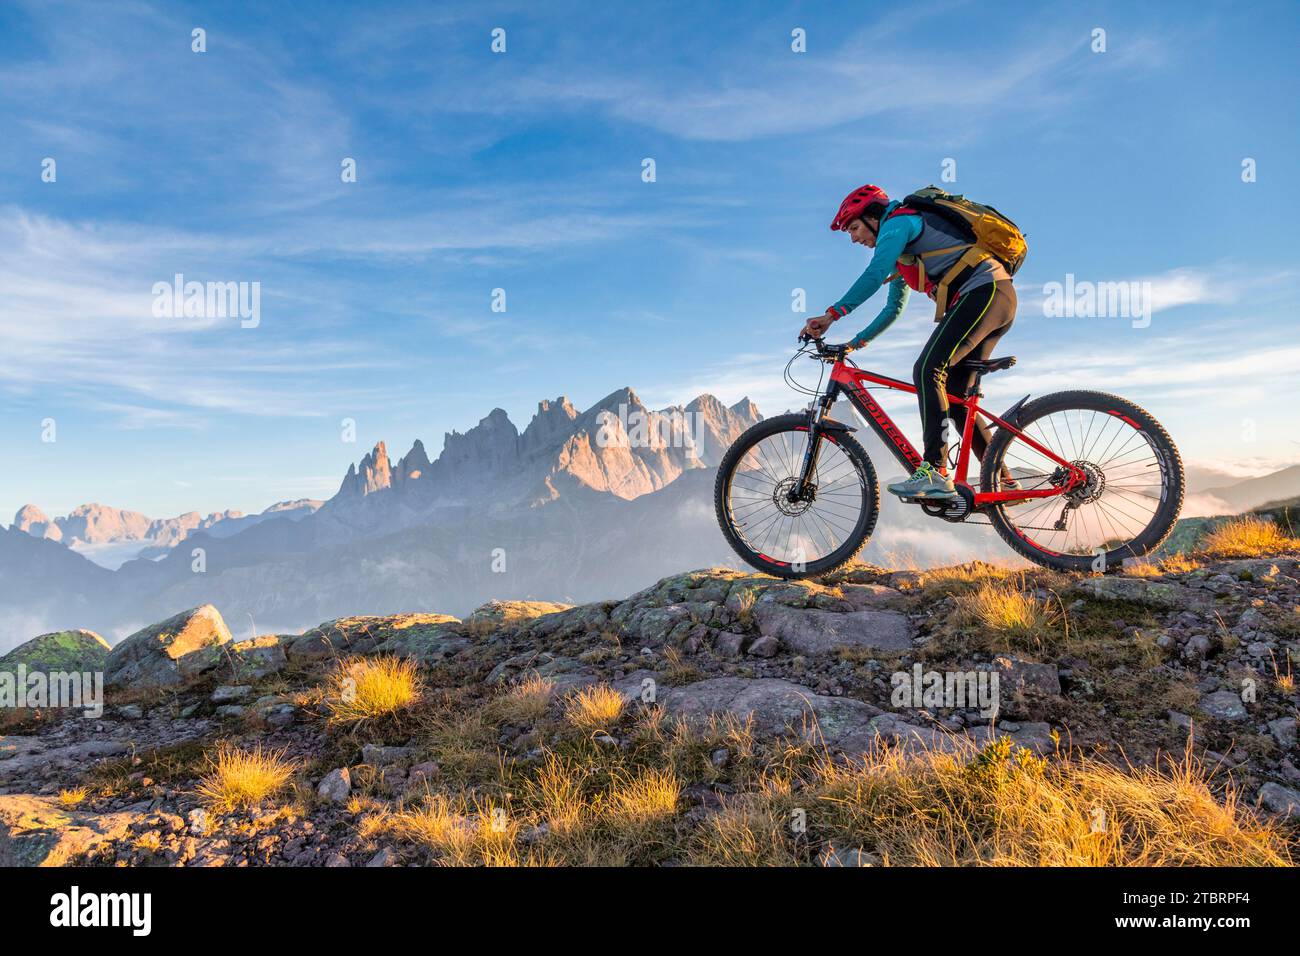 Italy, Veneto, province of Belluno, Falcade, outdoor activities with family, woman cyclist riding an e-bike in the mountains, in the background the Pale di San Martino chain at sunset Stock Photo